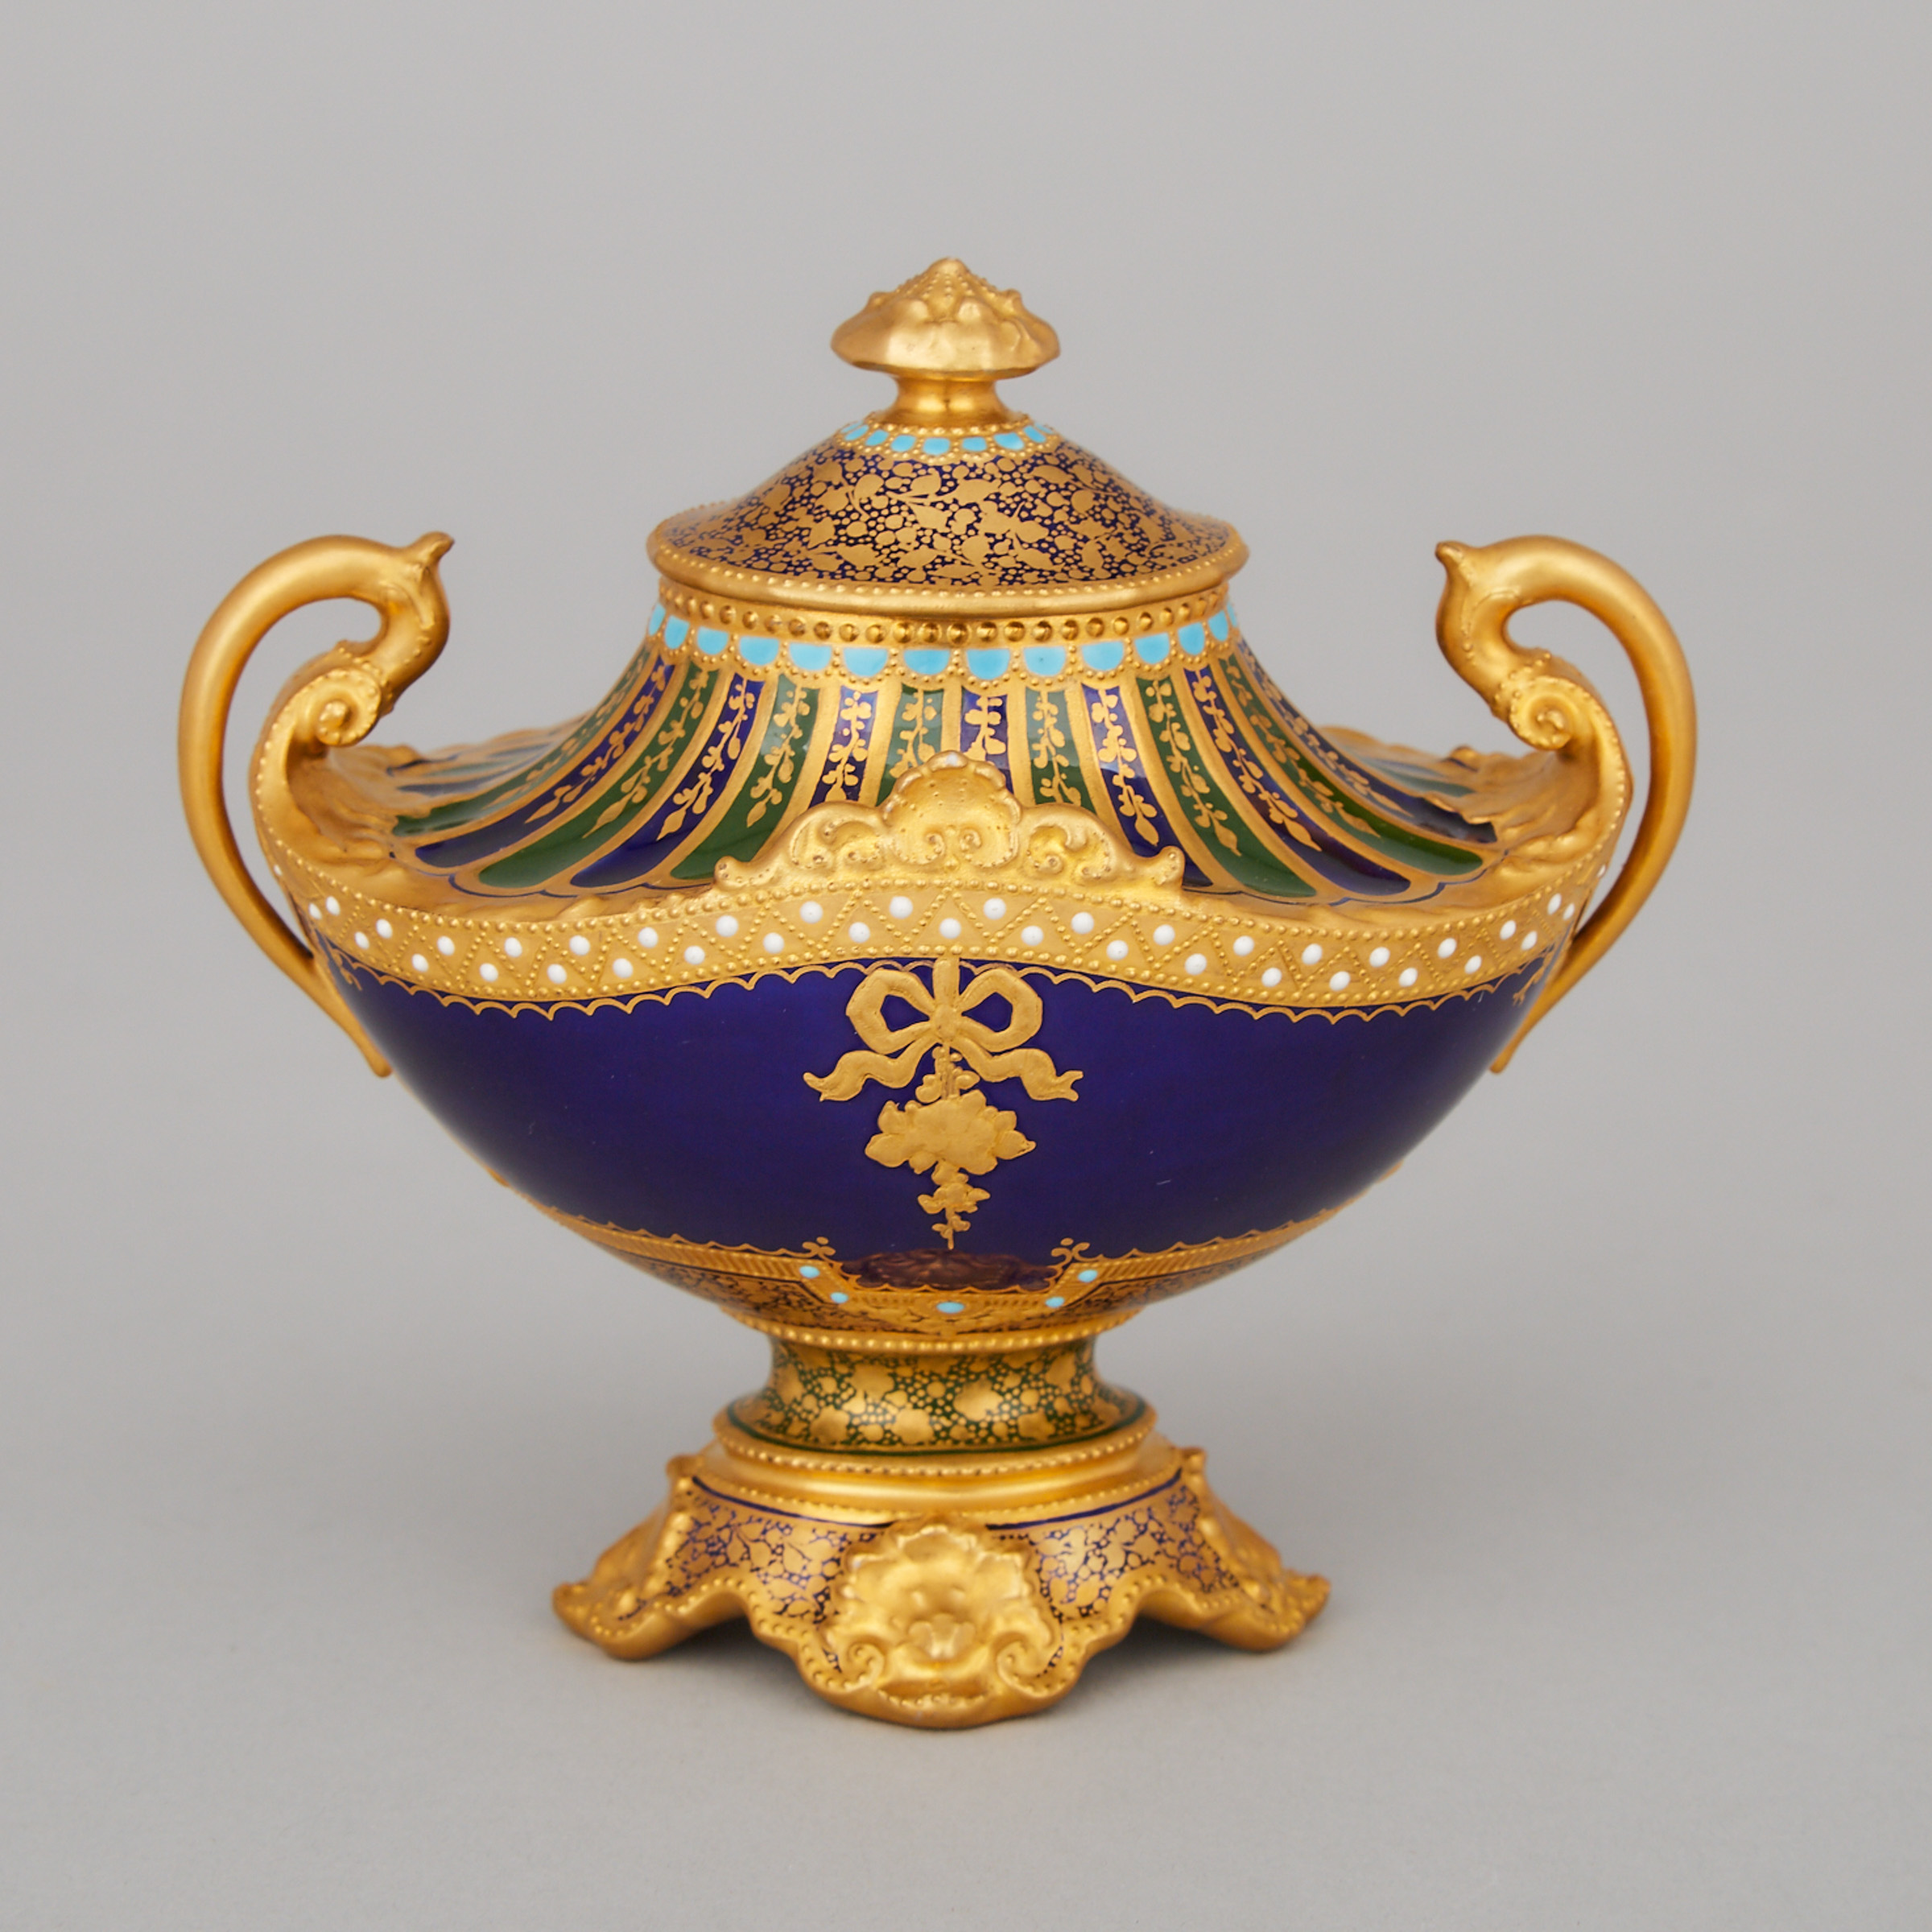 Royal Crown Derby 'Jeweled' Two-Handled Cabinet Vase and Cover, Désiré Leroy, 1900